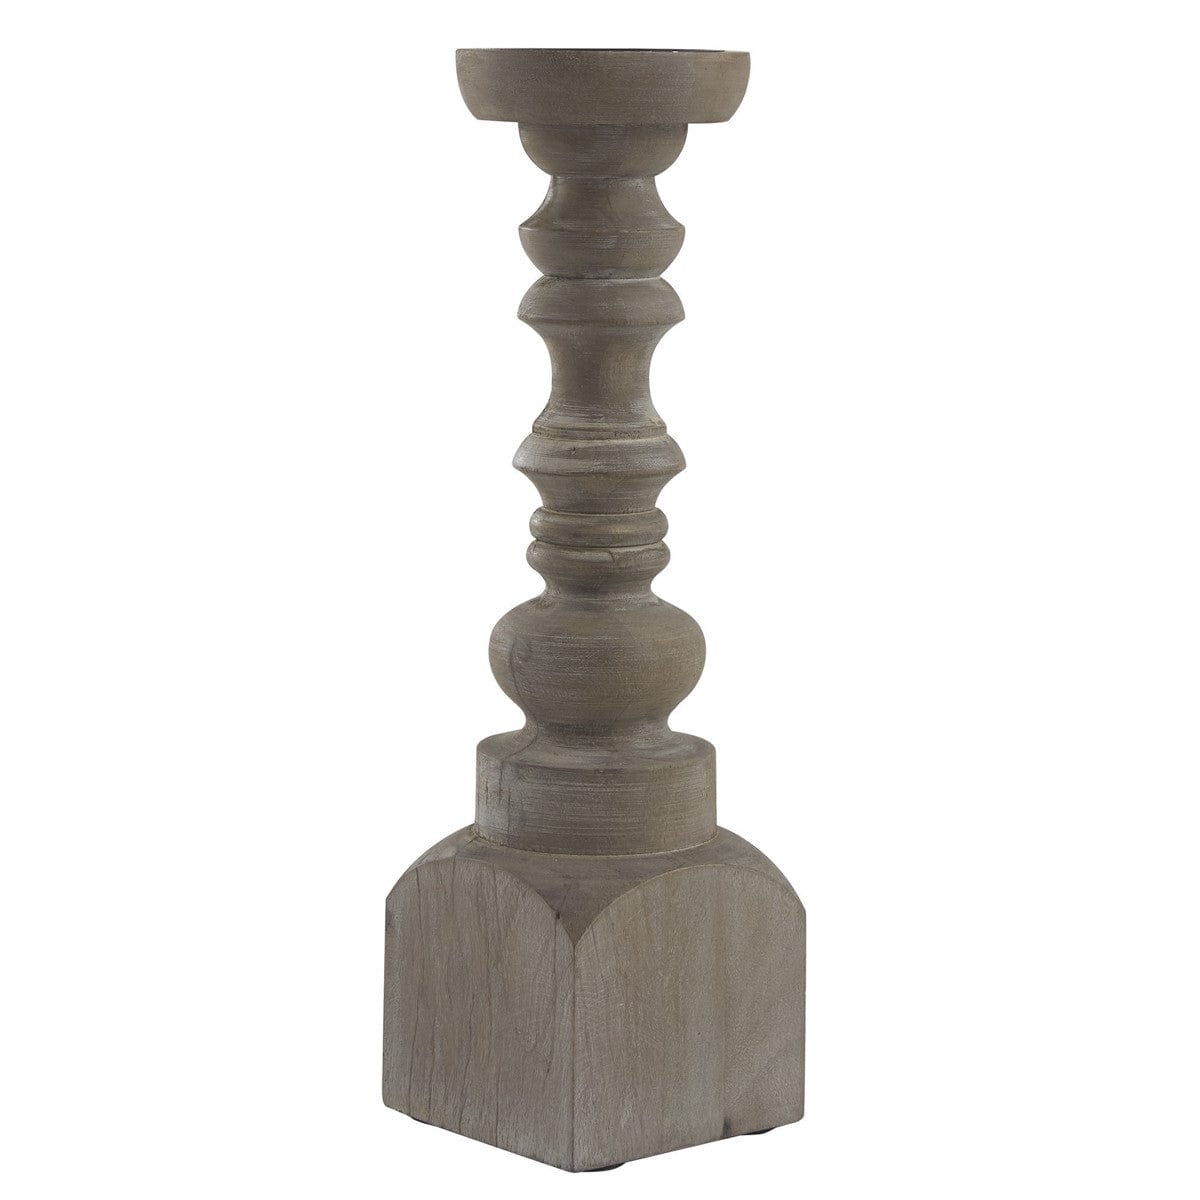 Wood Brighton Candlestick Candle Holder For Pillar Candles - 15" High-Park Designs-The Village Merchant